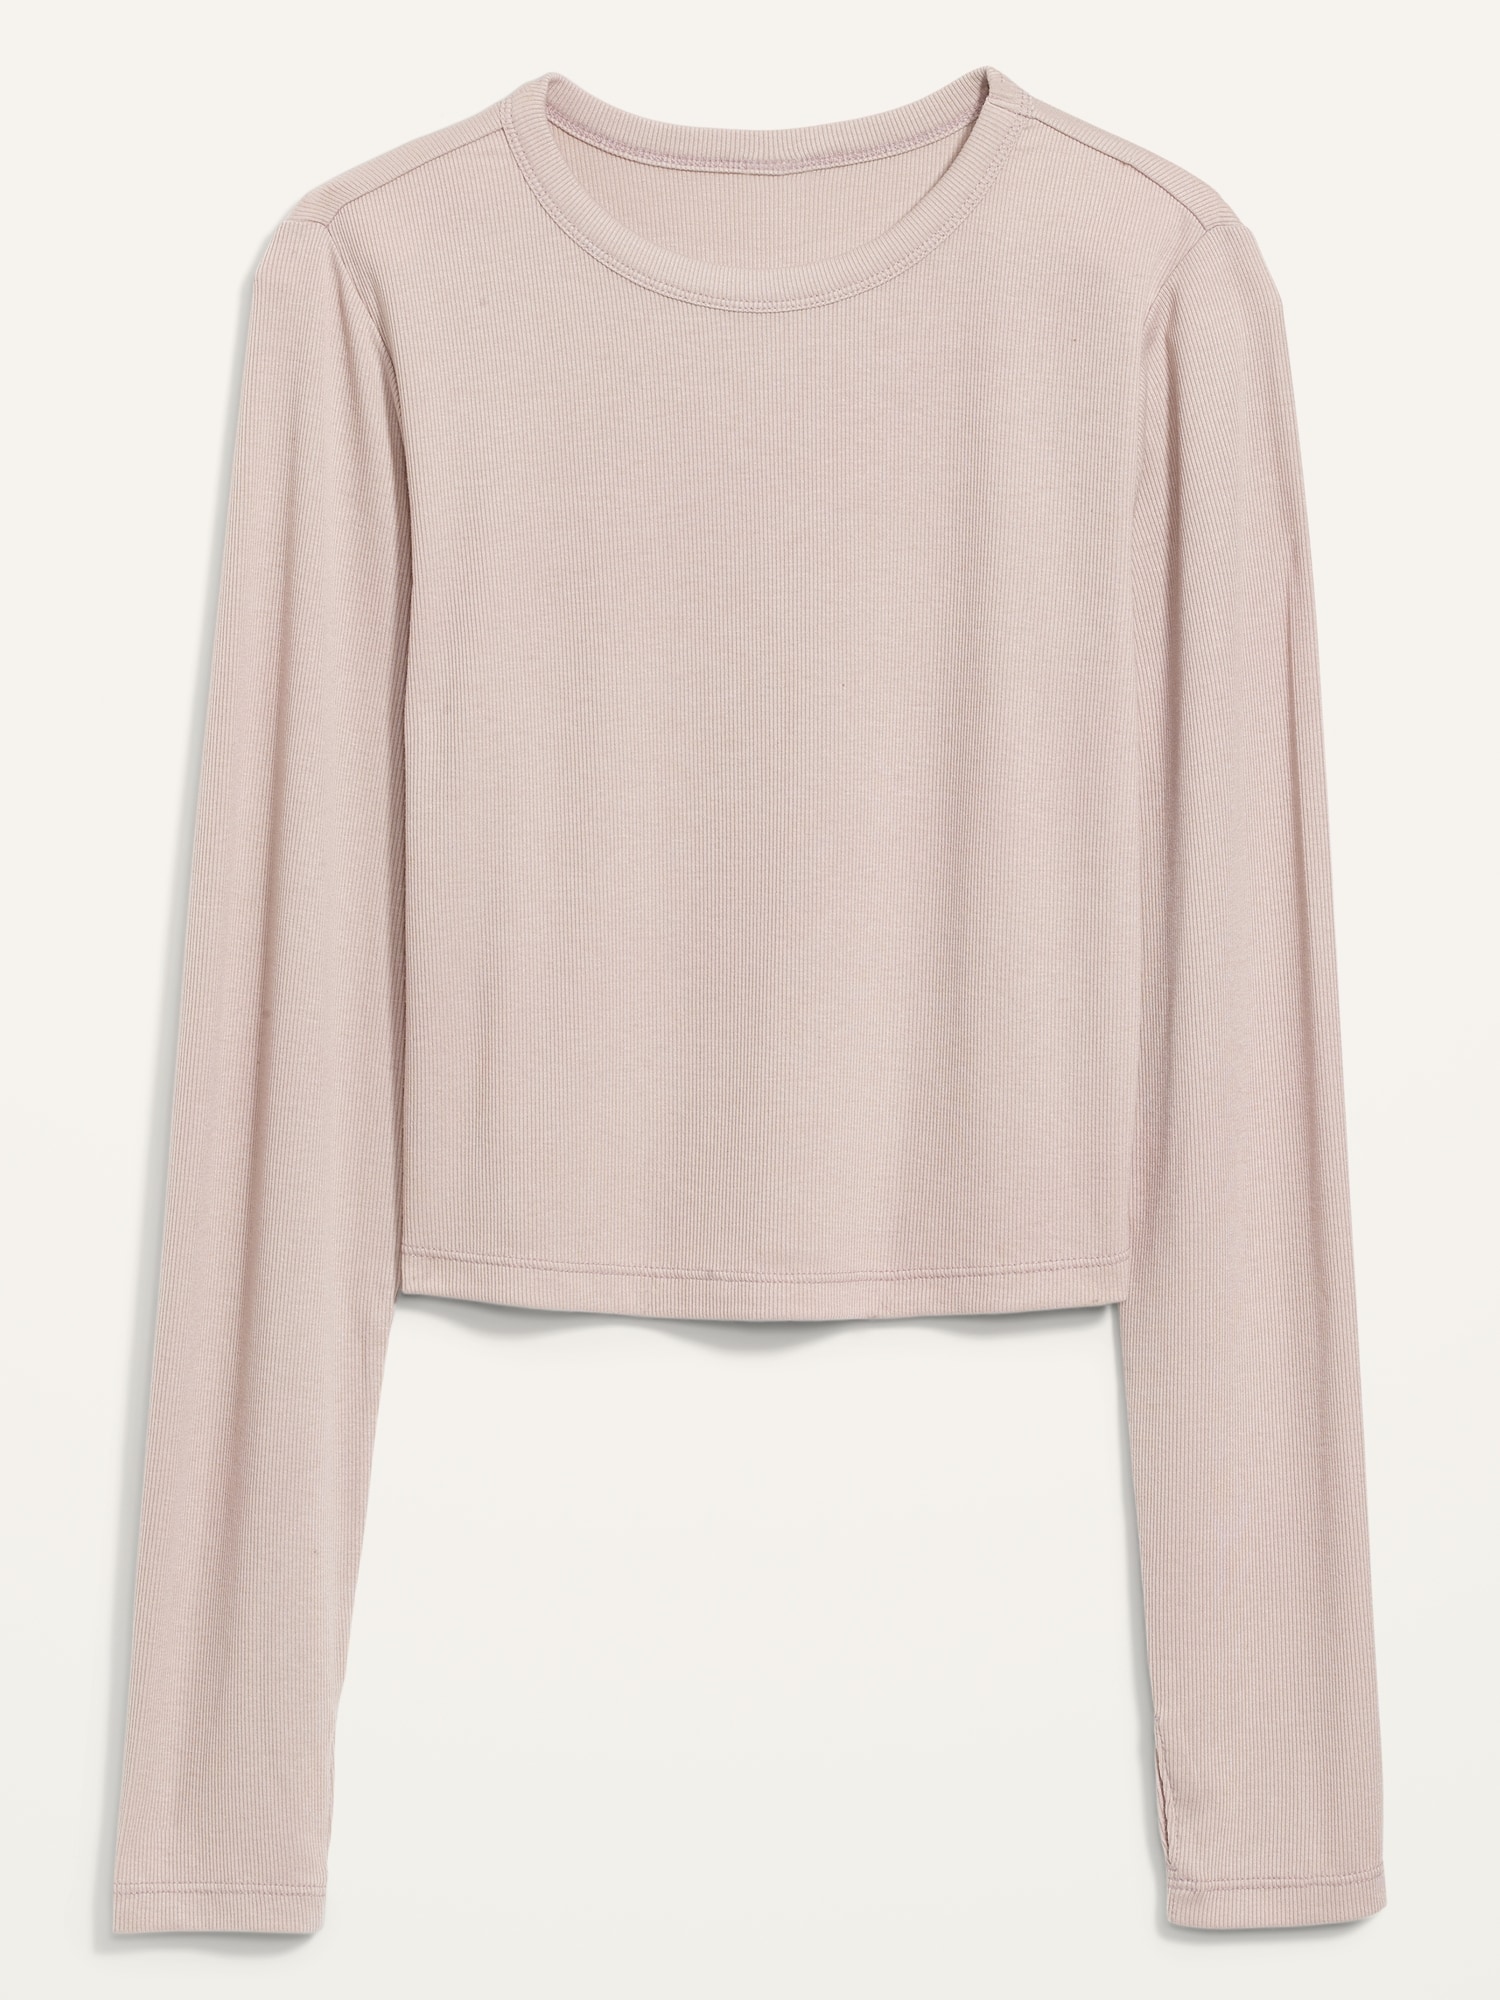 UltraLite Long-Sleeve Crew-Neck Ribbed Cropped Top for Women | Old Navy